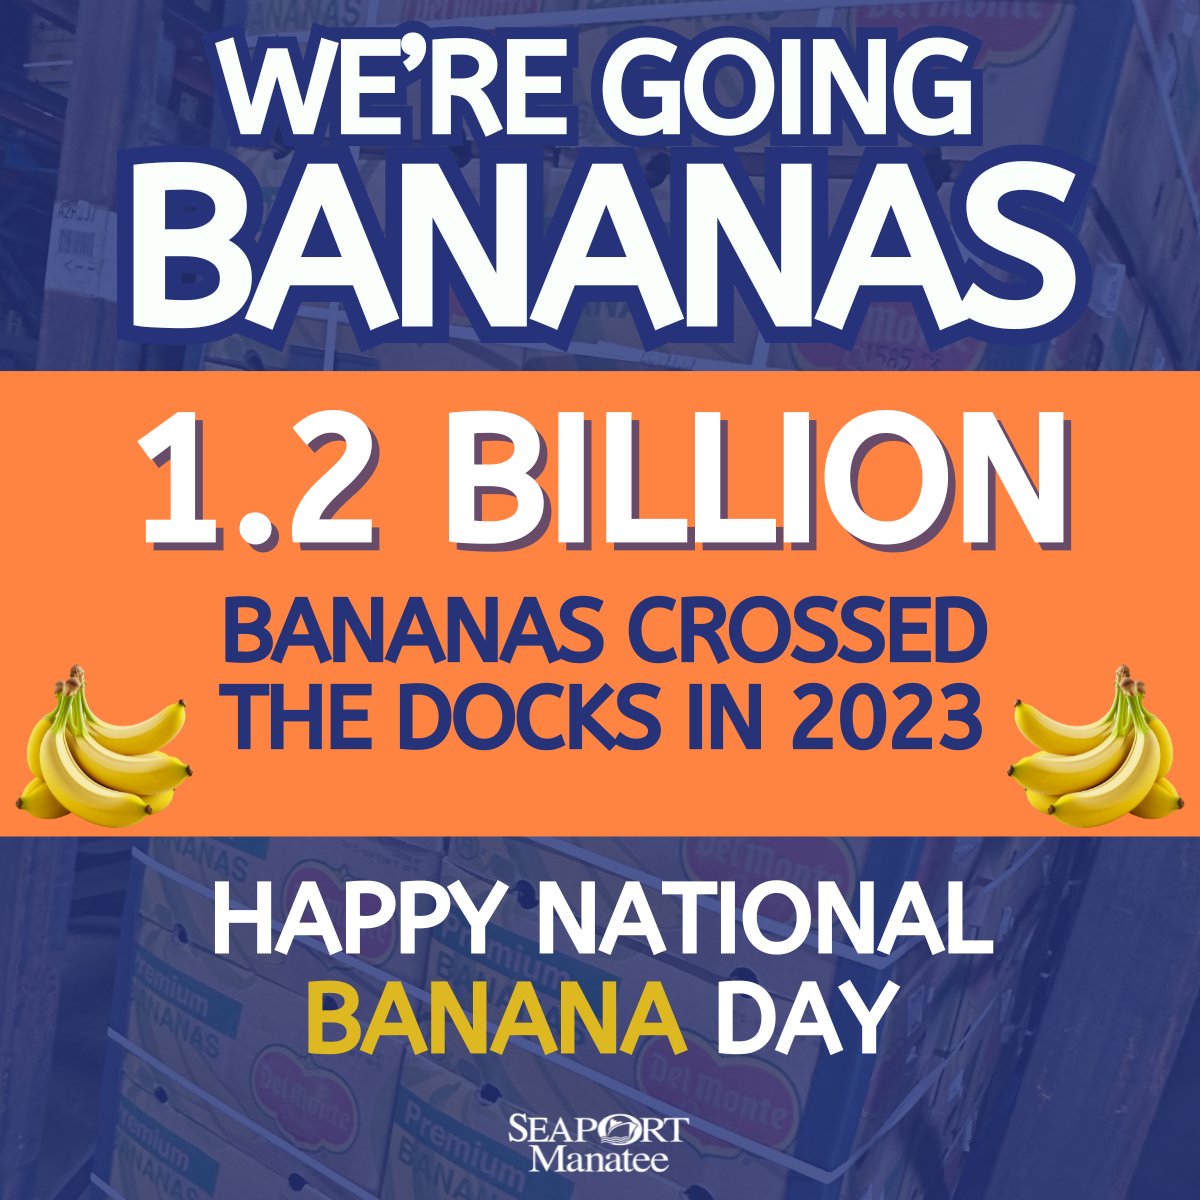 🍌 In 2023, 1.2 billion bananas crossed #SeaPortManatee, valued at $94 million, up 4.95% from 2022. In fact, they're our 5th largest import at the port. Now that’s how you celebrate #NationalBananaDay! #cargo #bananas #shipping ⛴️